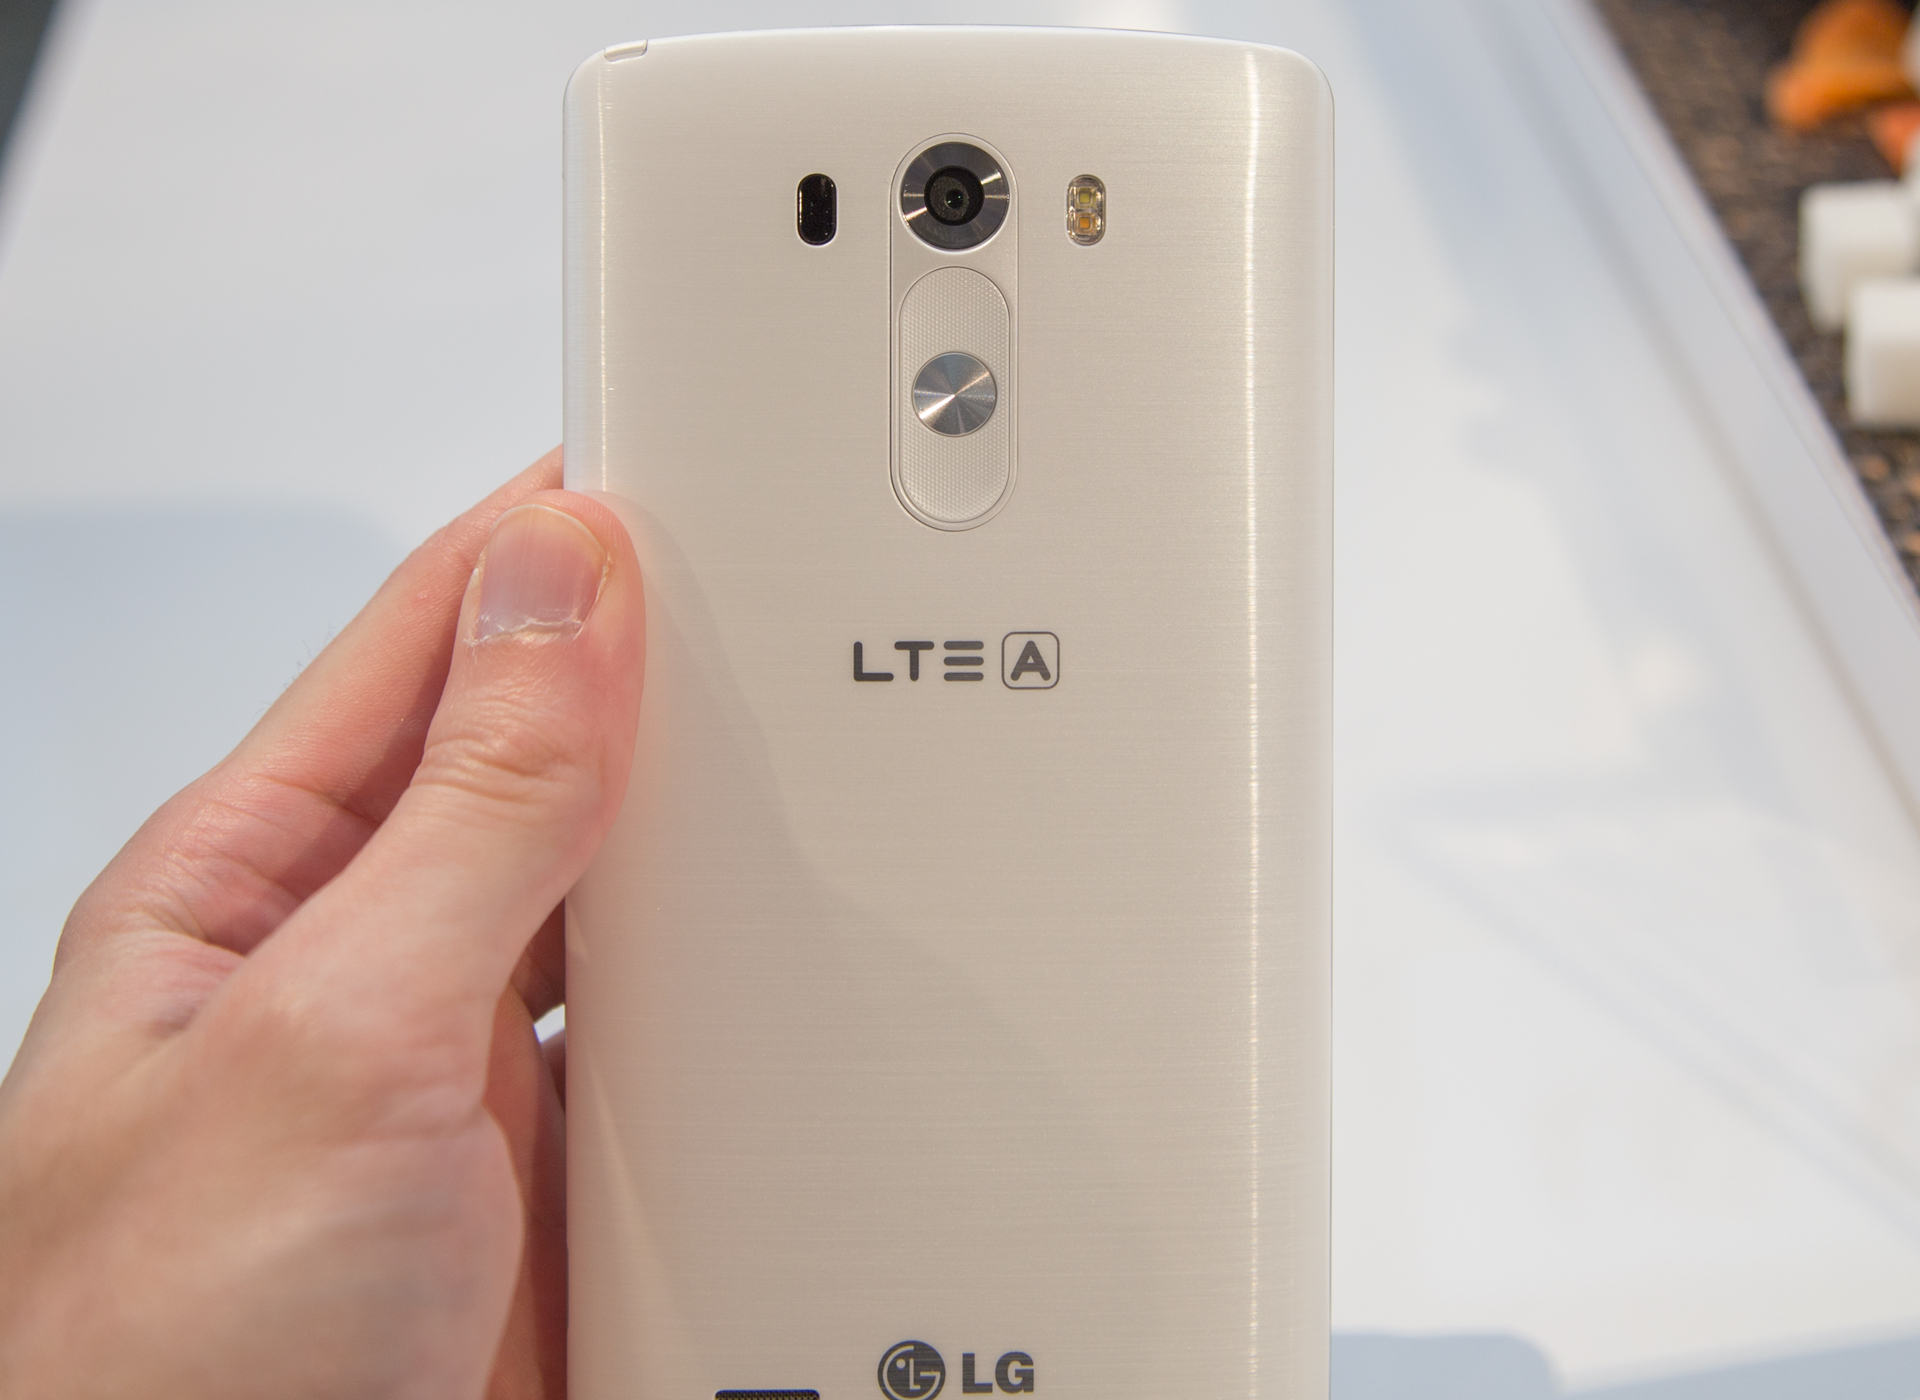 LG G3 LTE-A - Full phone specifications